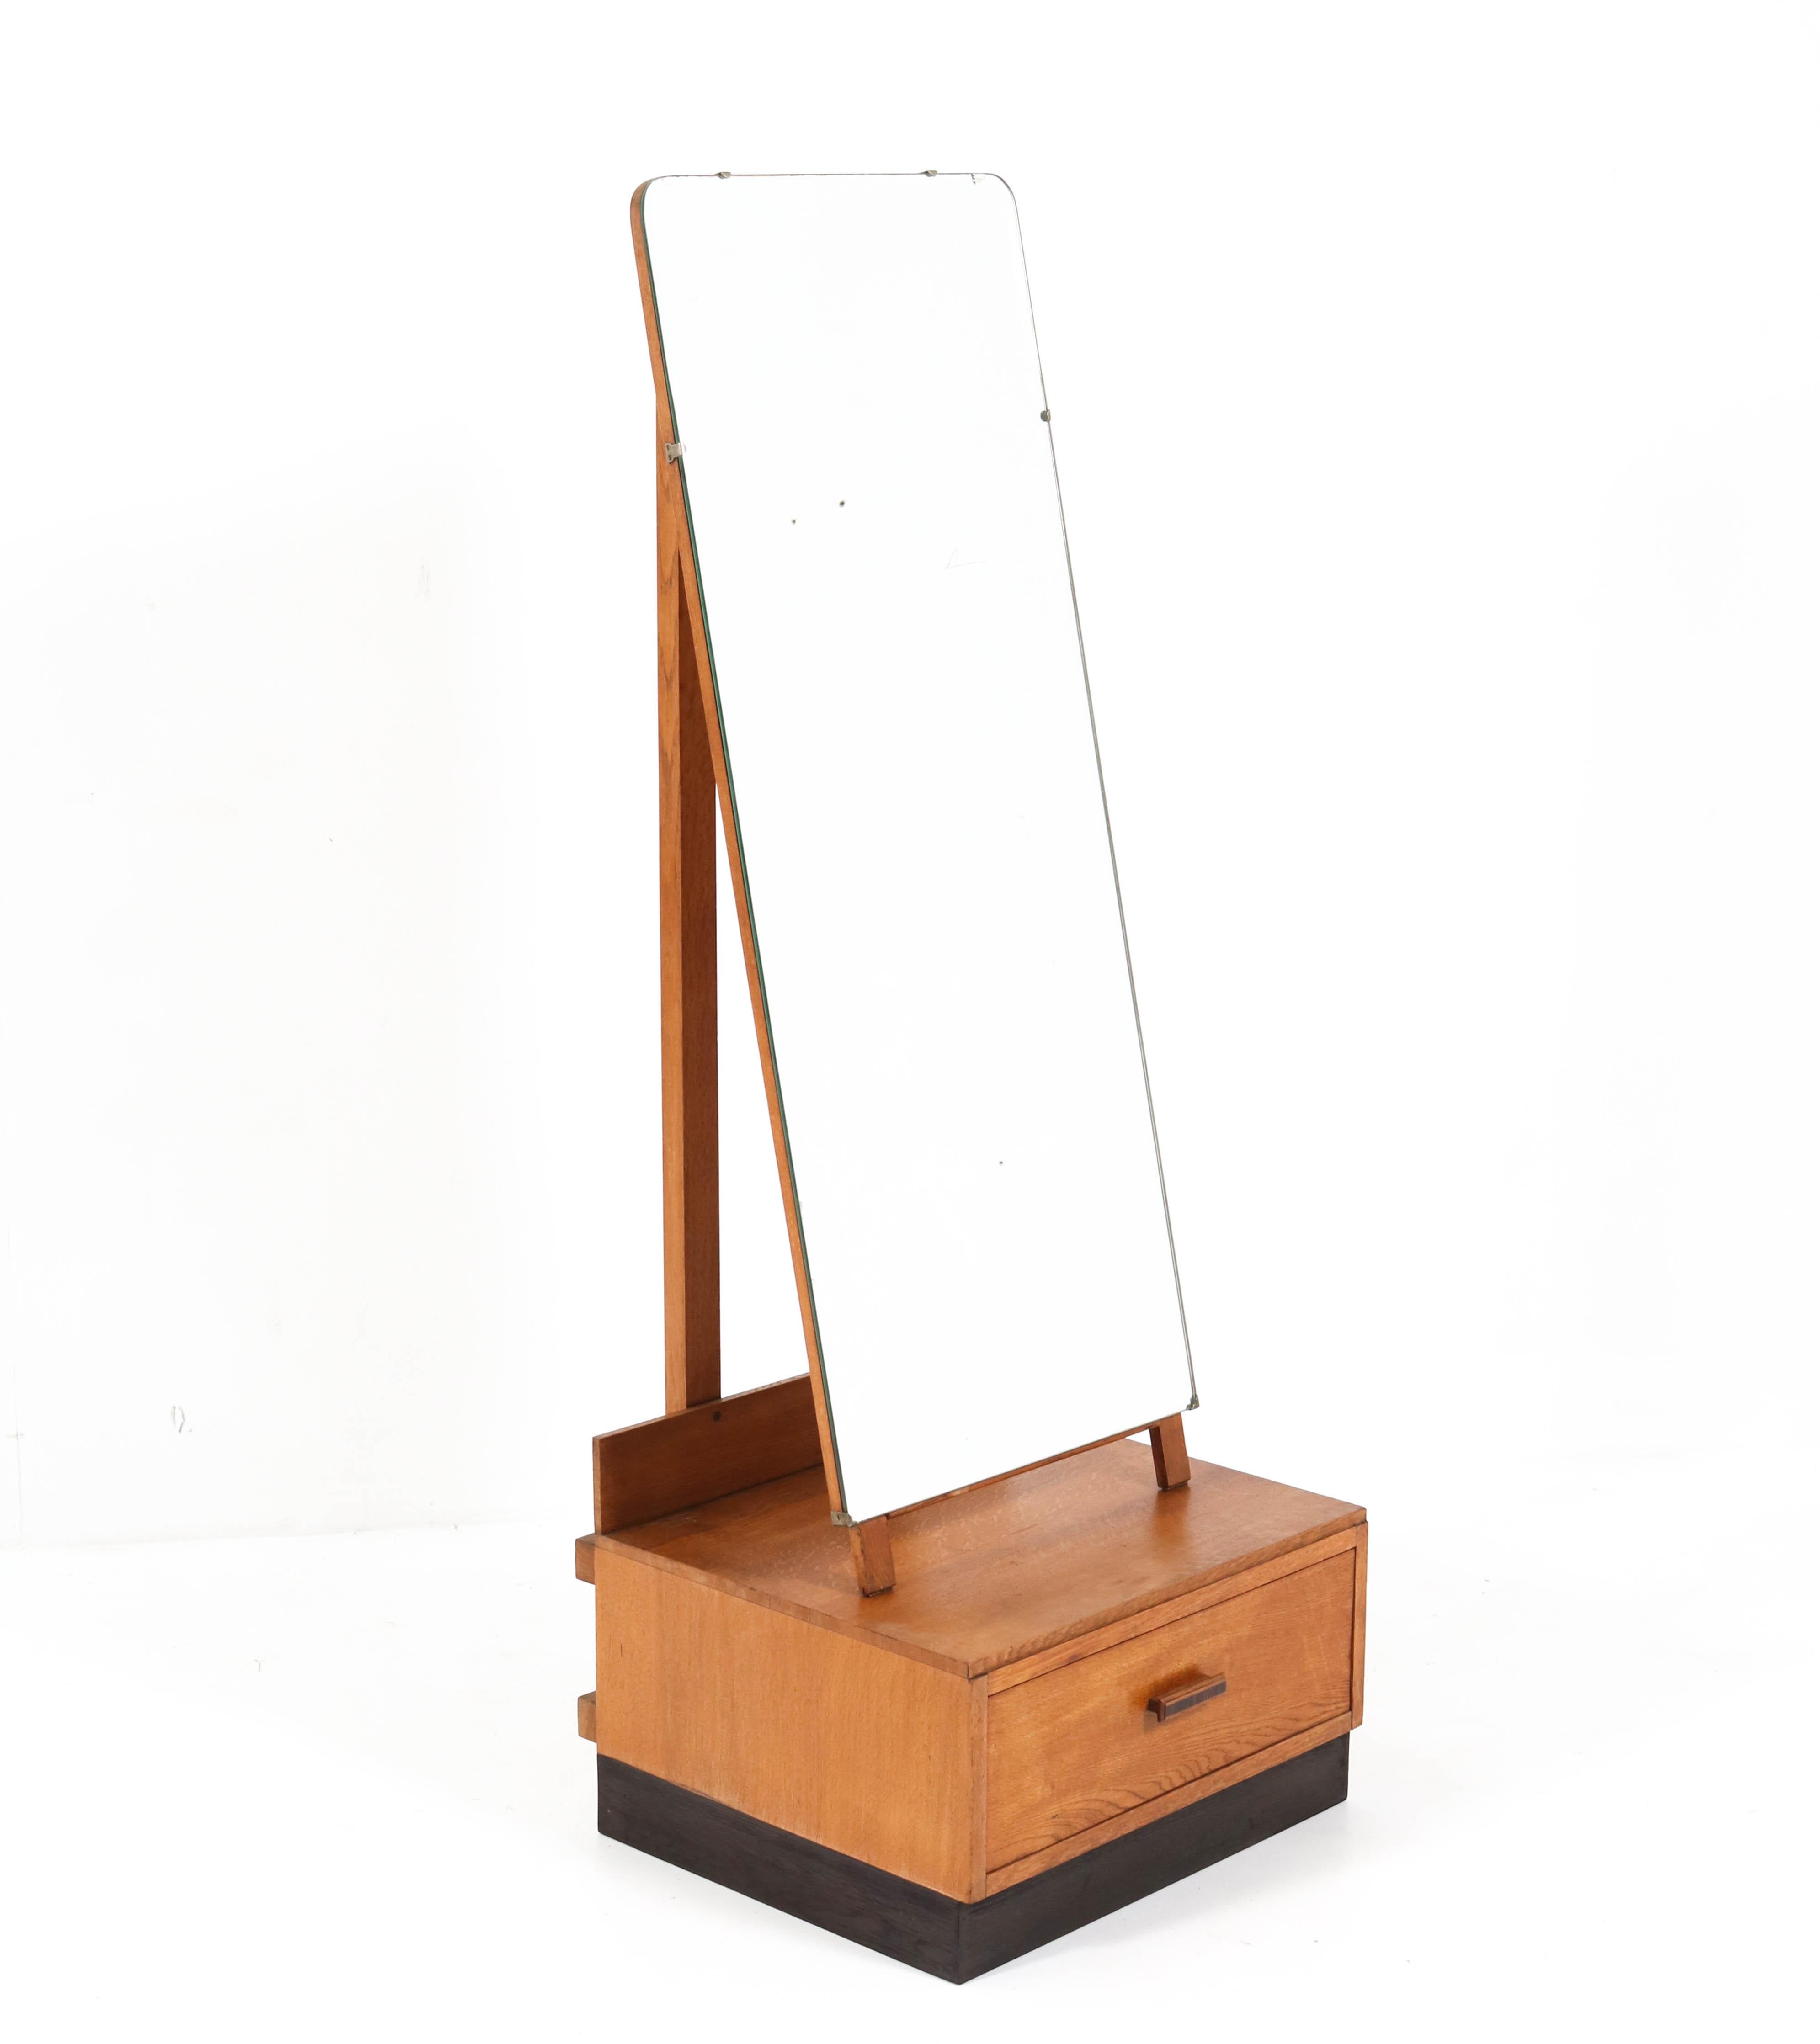 Stunning oak Art Deco full length standing mirror.
Design by
Striking English design from the 1930s.
Solid oak and original oak veneer base.
Original beveled mirror.
Marked with original manufacturers tag.
In very good original condition with